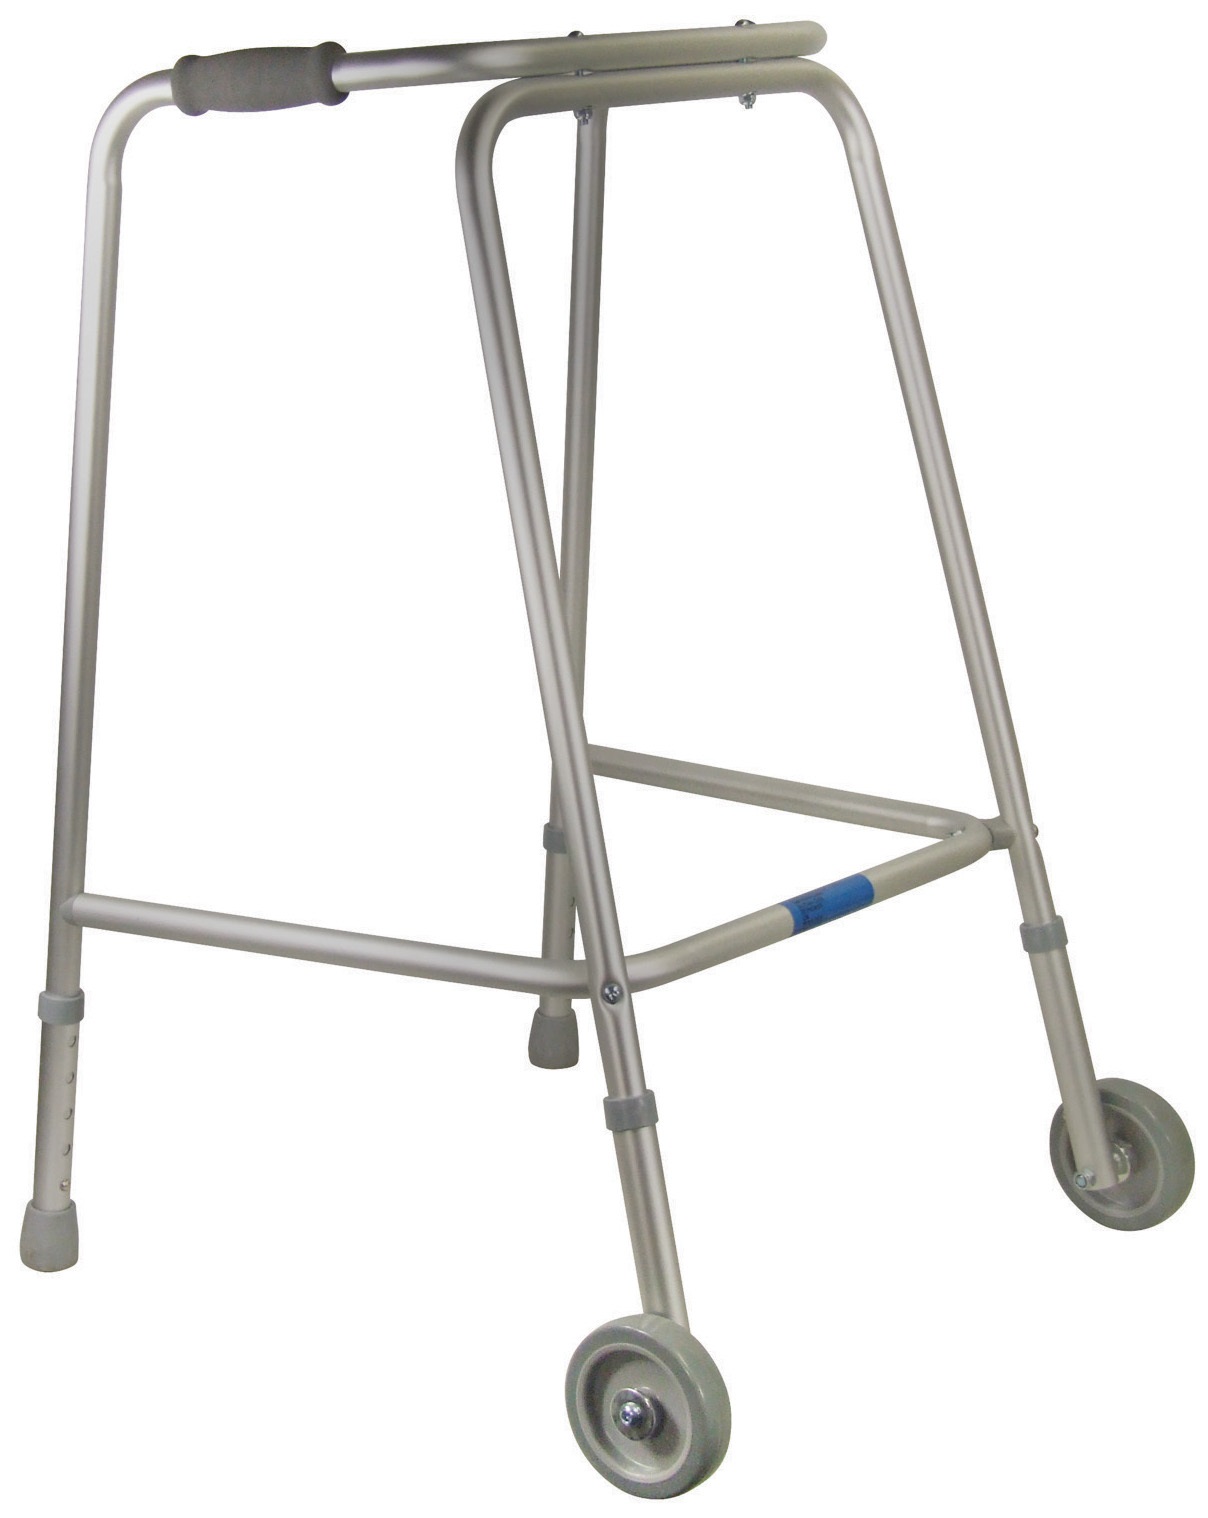 Small Lightweight Walking Frame with Wheels